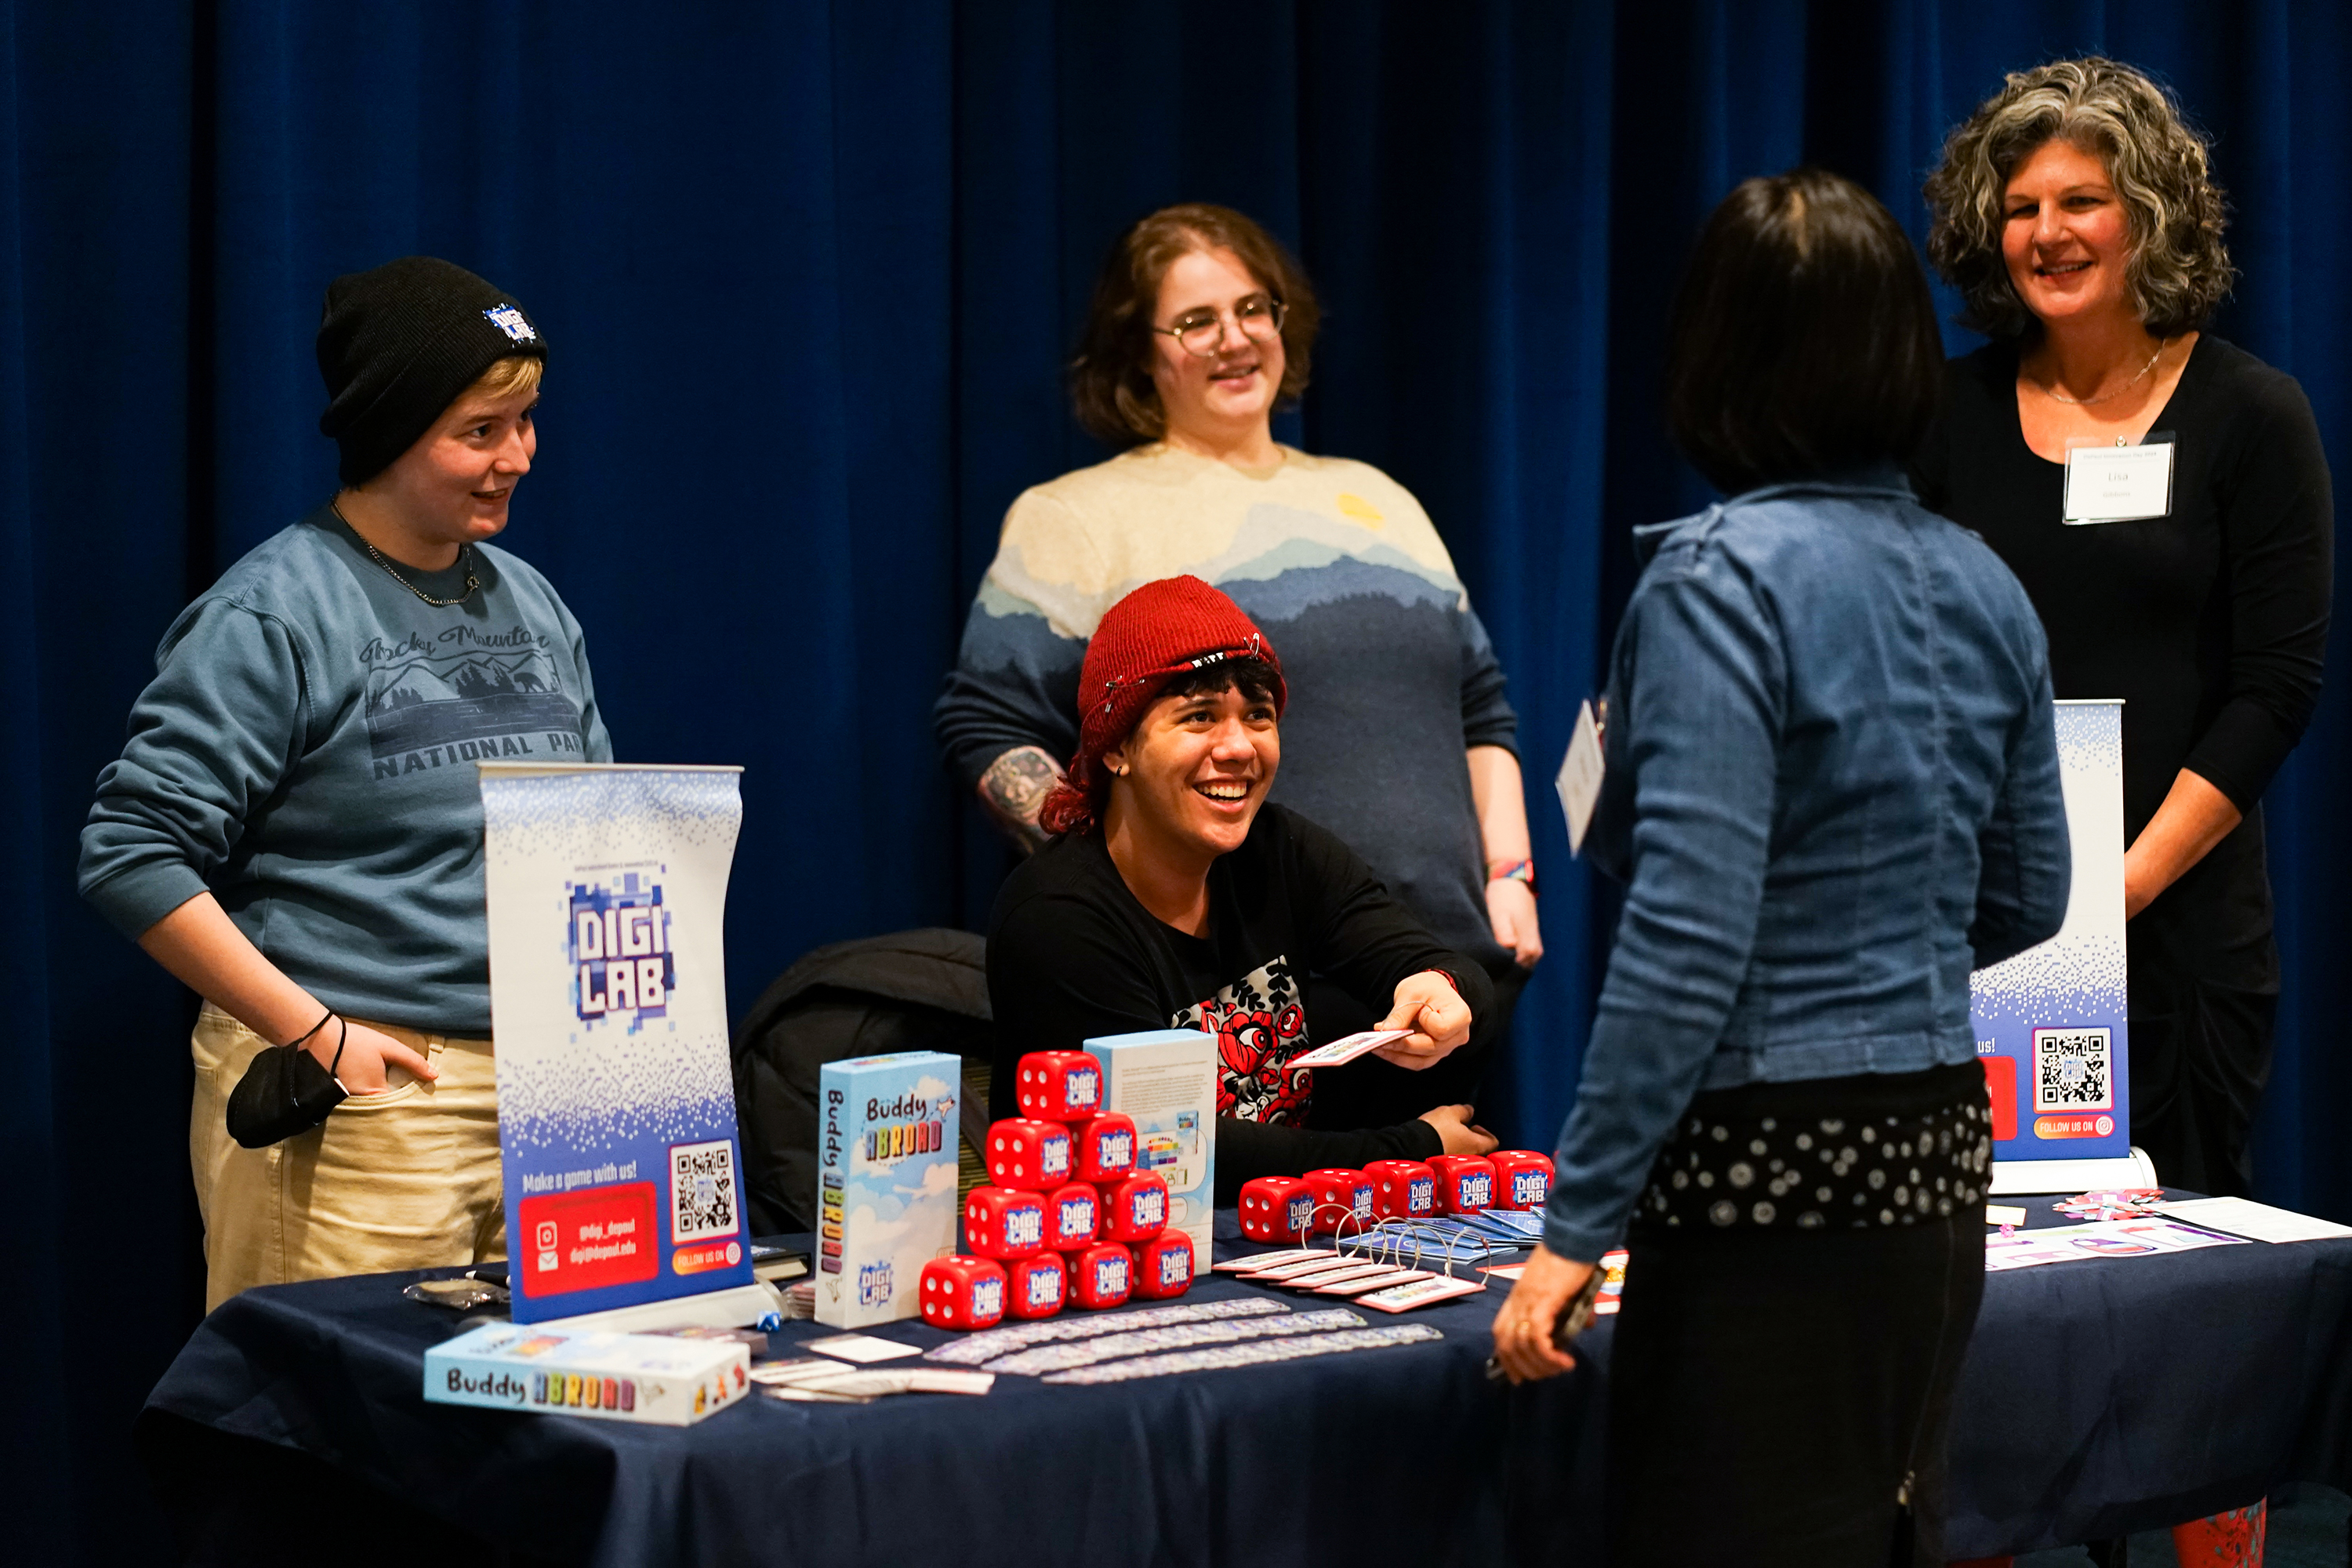 People smiling at a table with swag and a board game